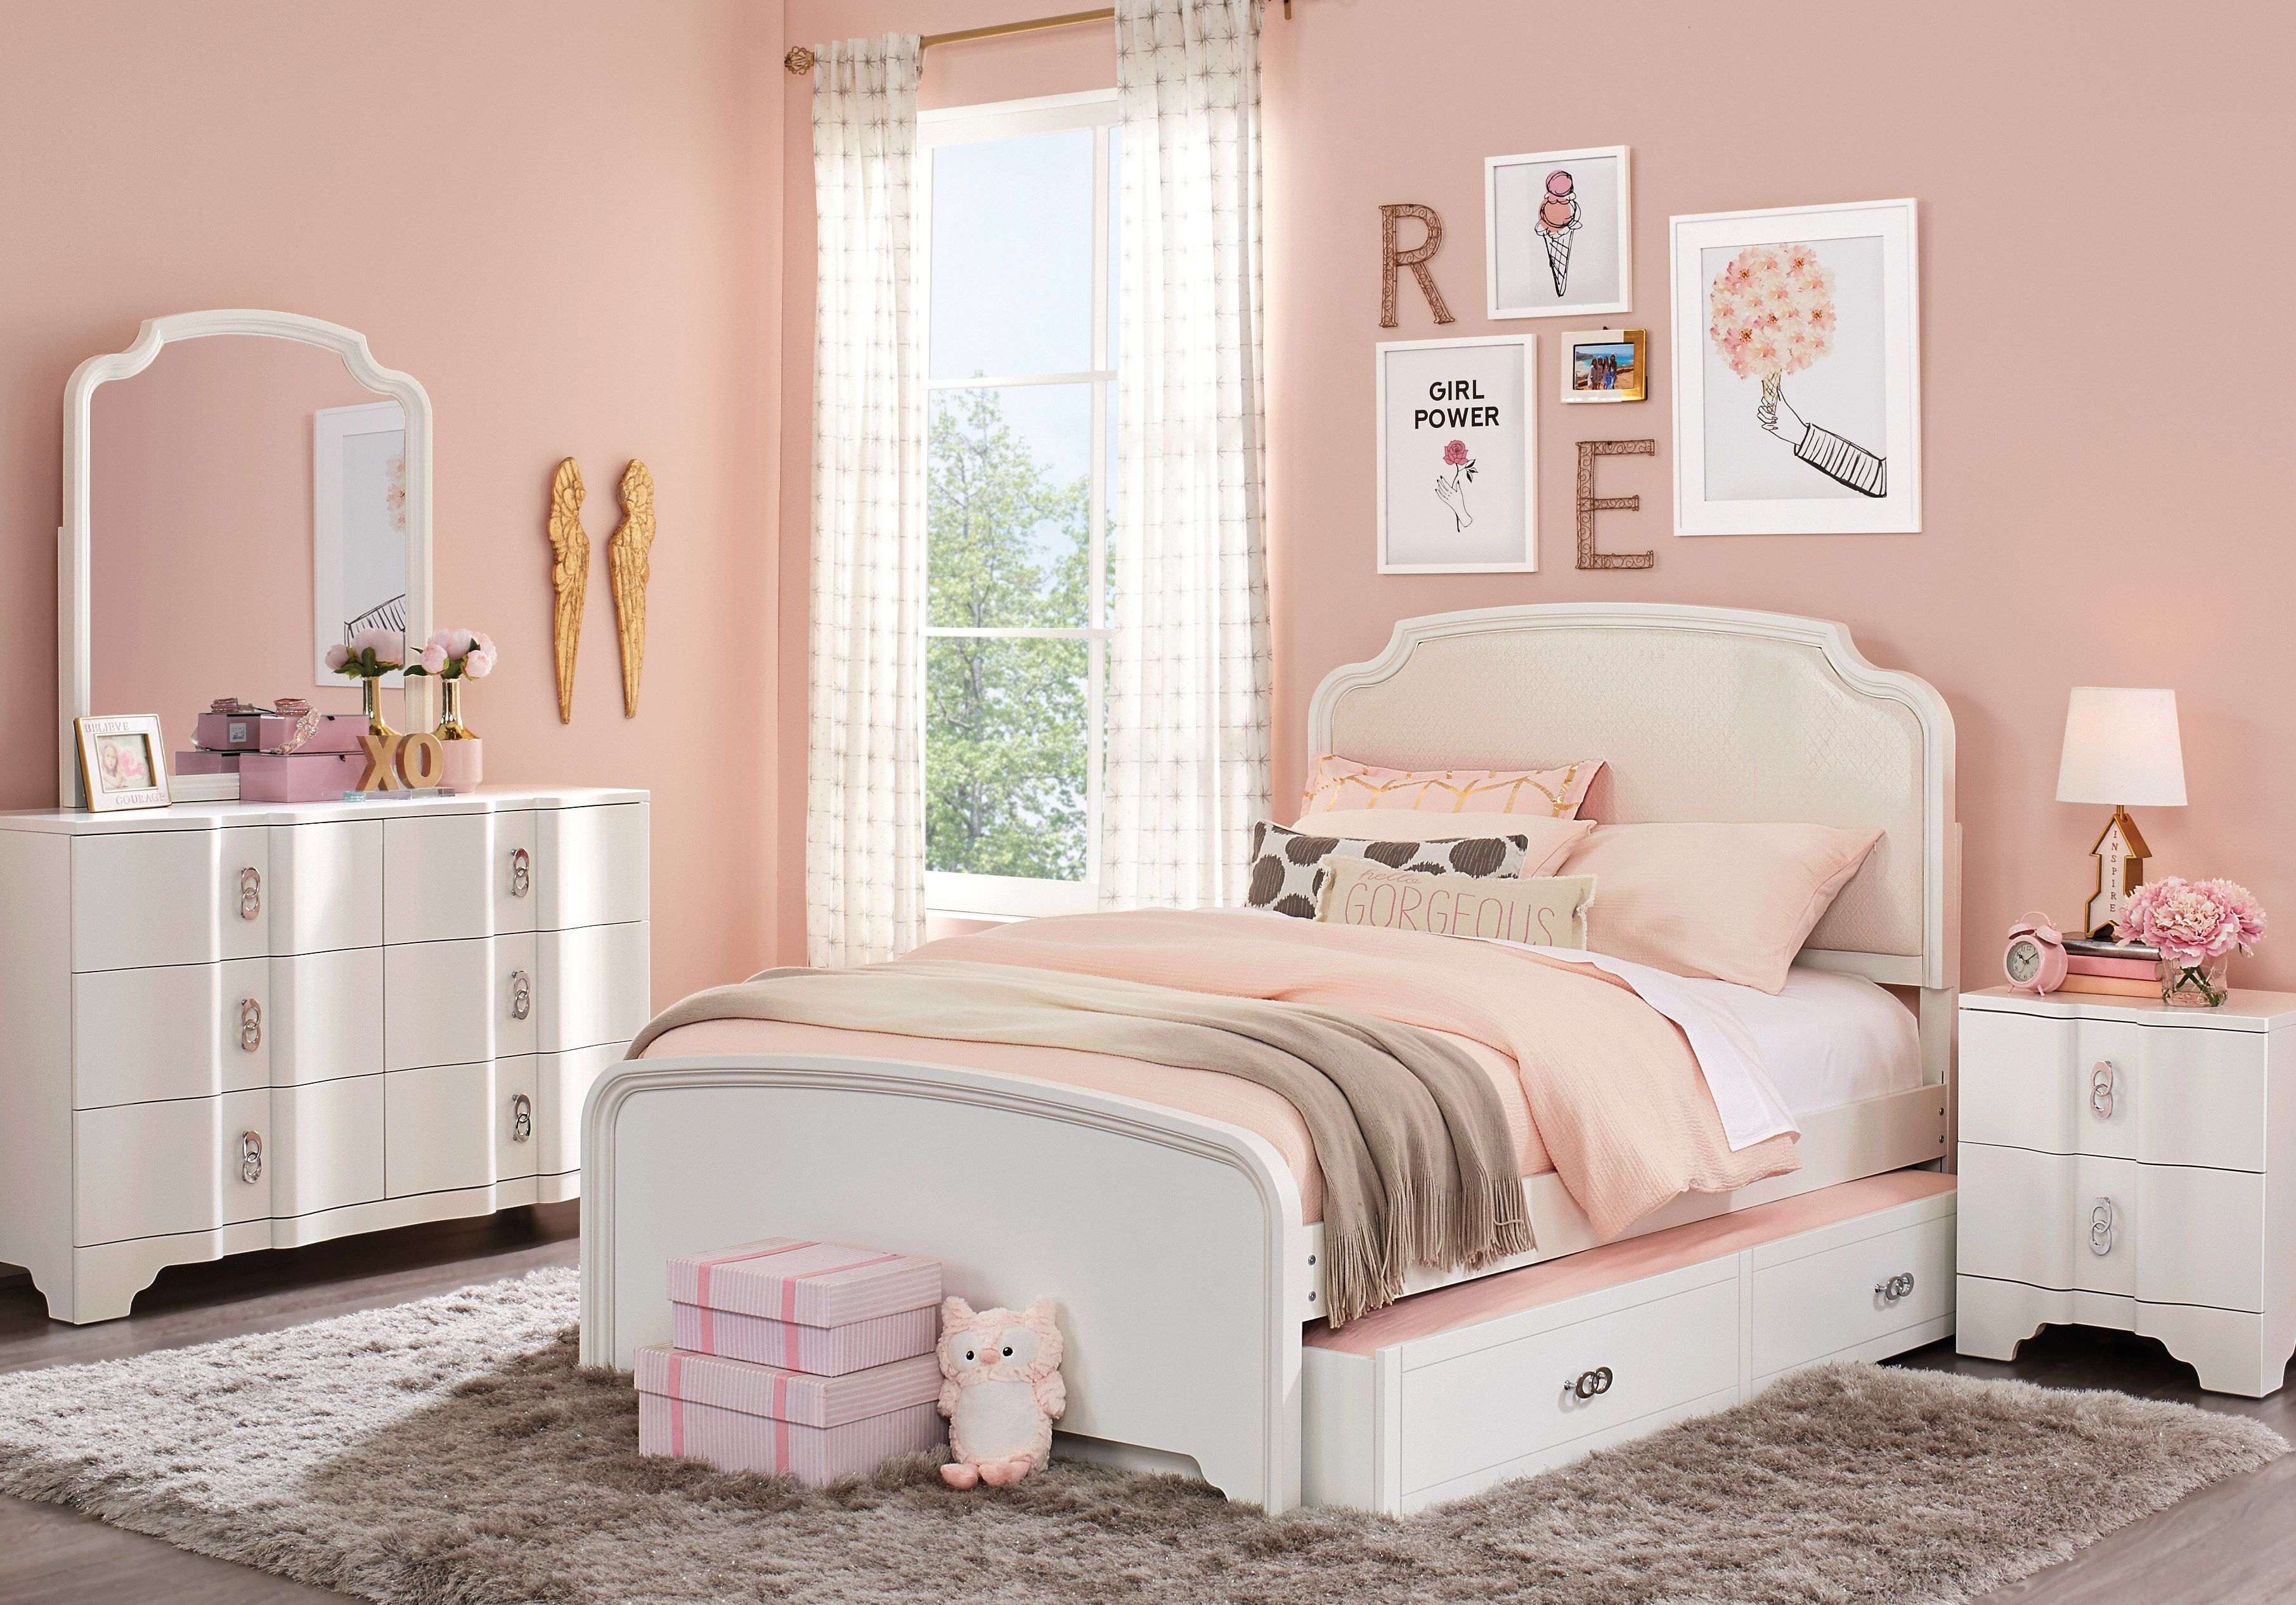 Rylee White 5 Pc Full Upholstered Bedroom Teen Bedroom Sets Colors intended for size 3621 X 2531